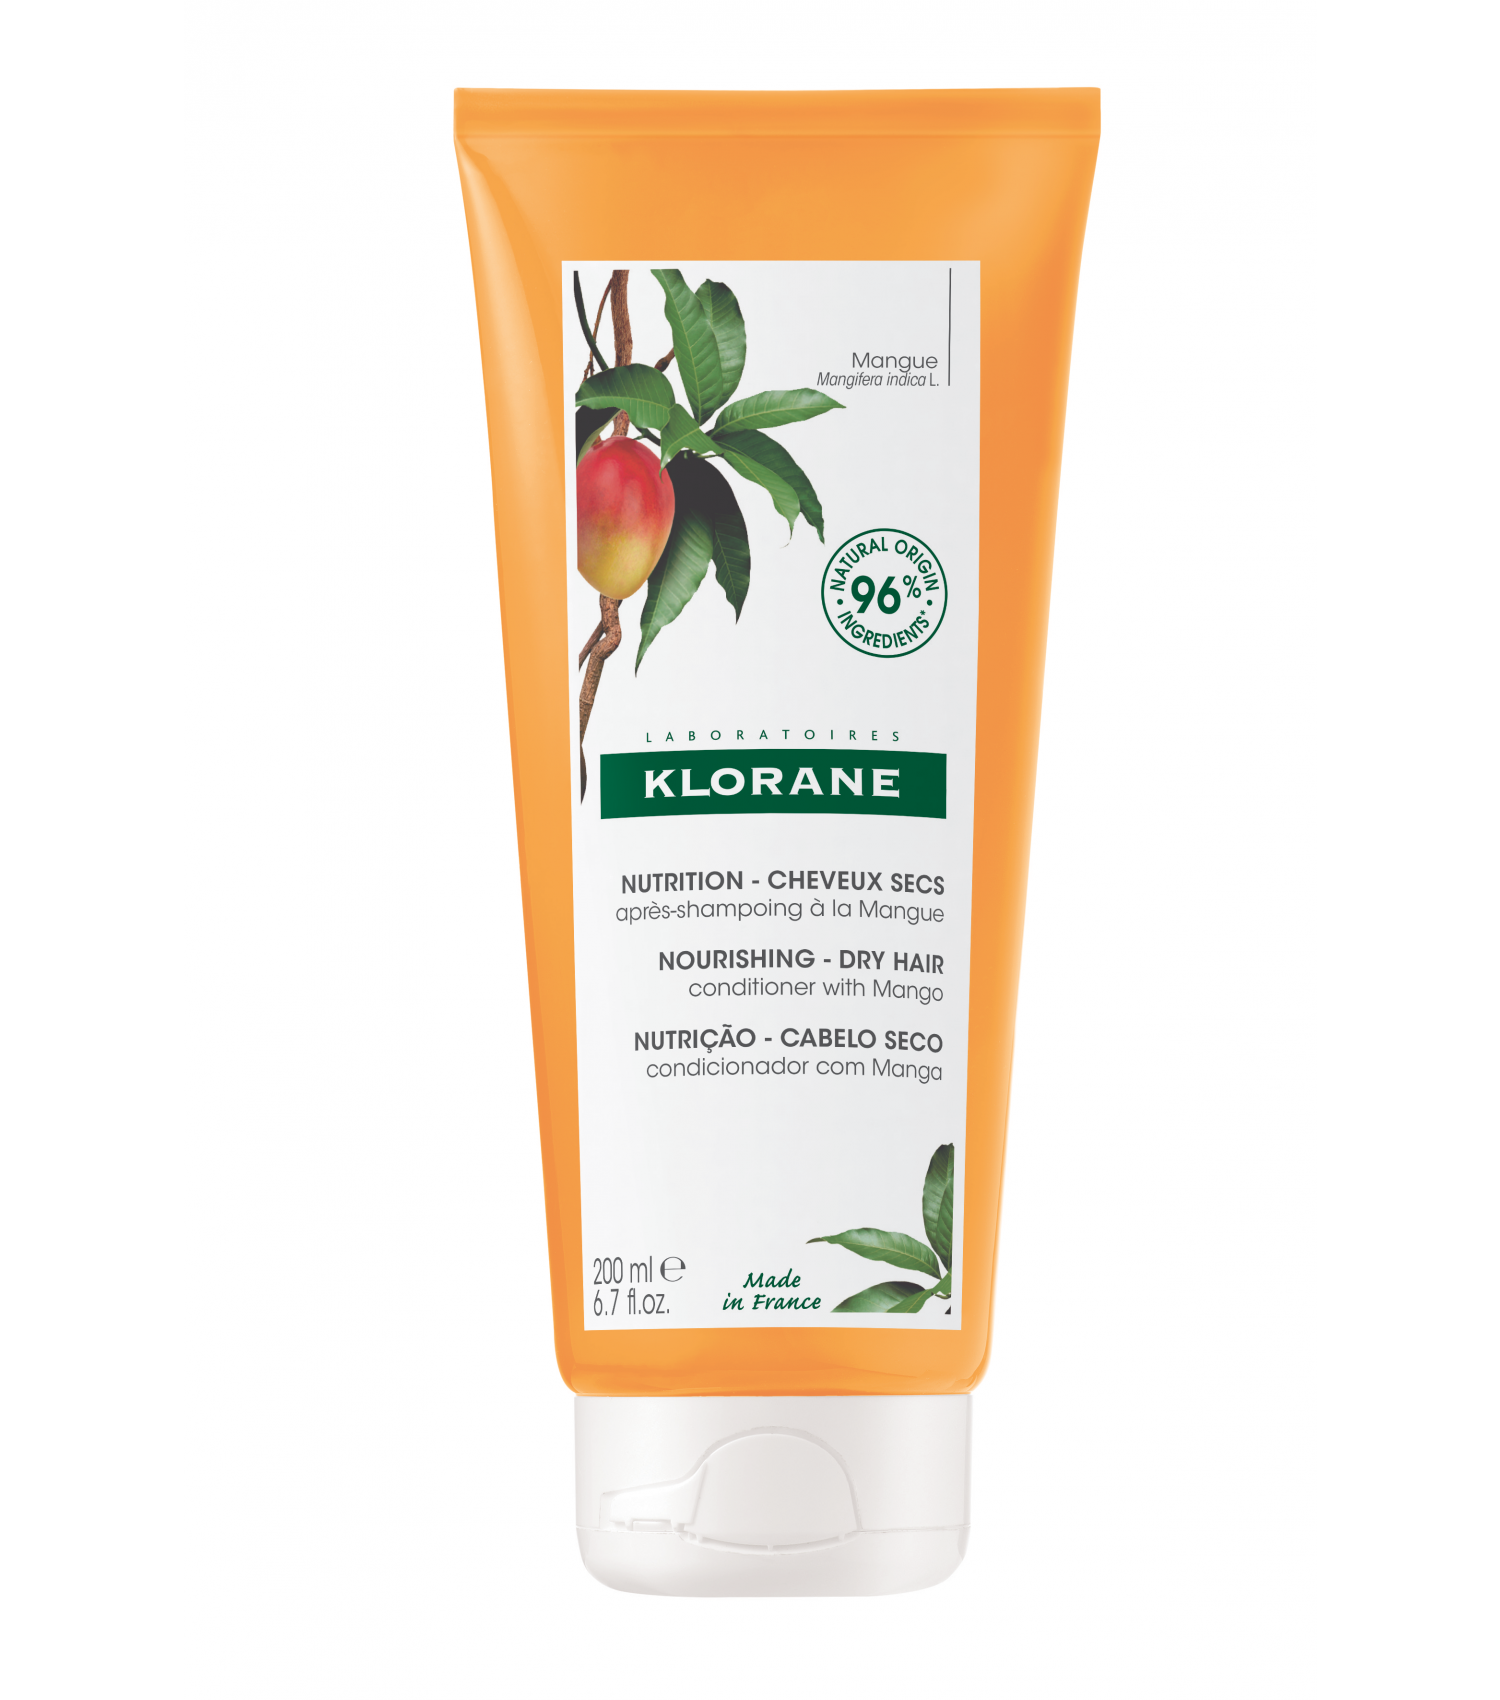 Klorane Nourishing Conditioner with Mango for Dry Hair Klorane Nourishing Conditioner with Mango for Dry Hair 1